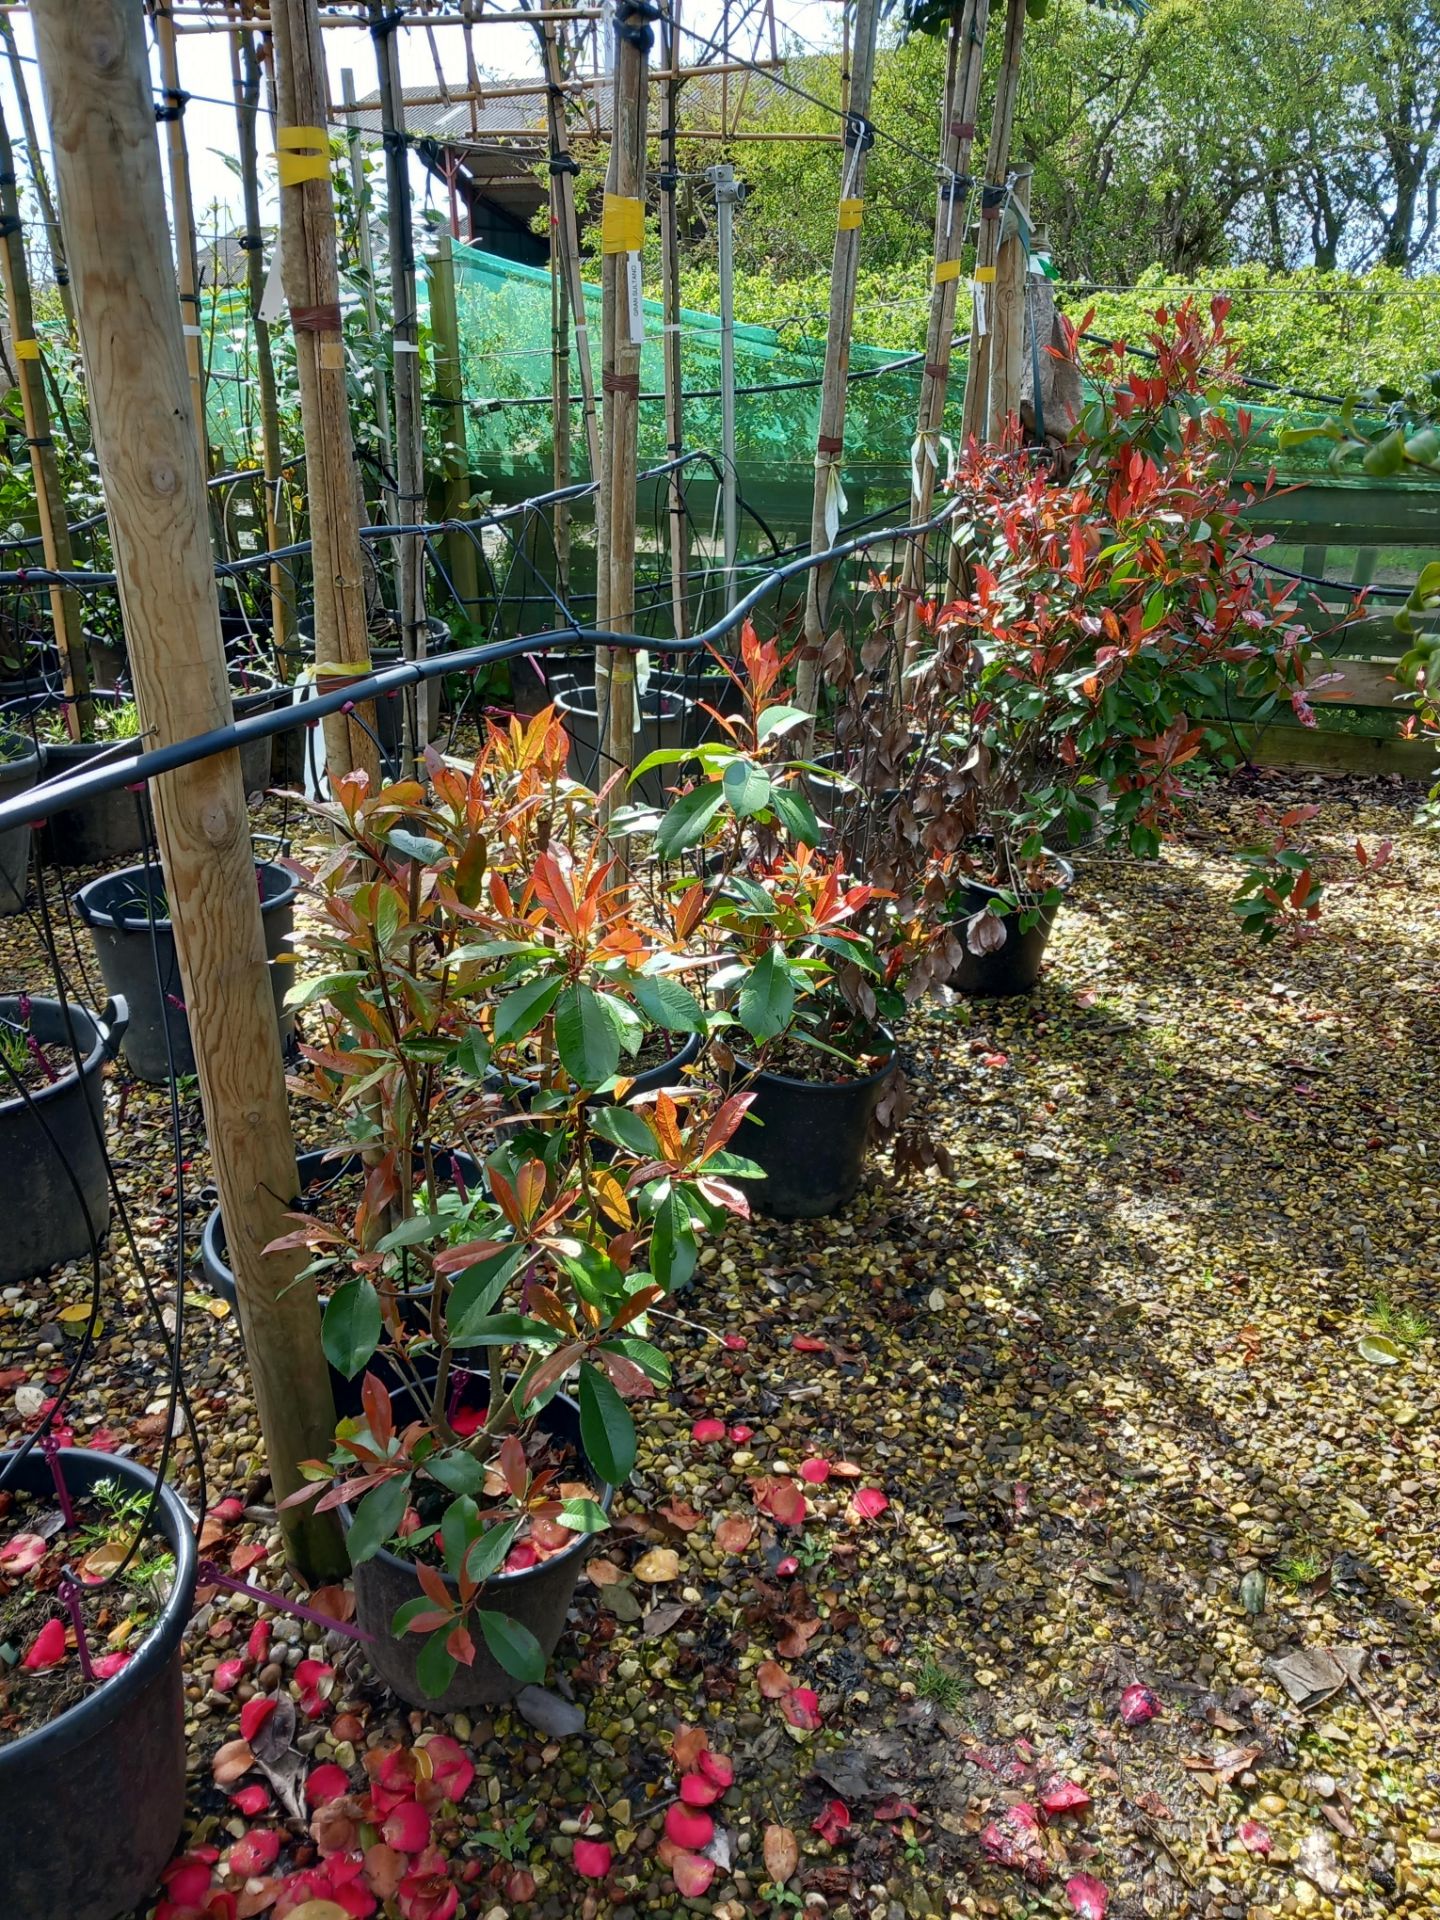 5 x Photinia Red Robbins Located to 7B (Viewing St